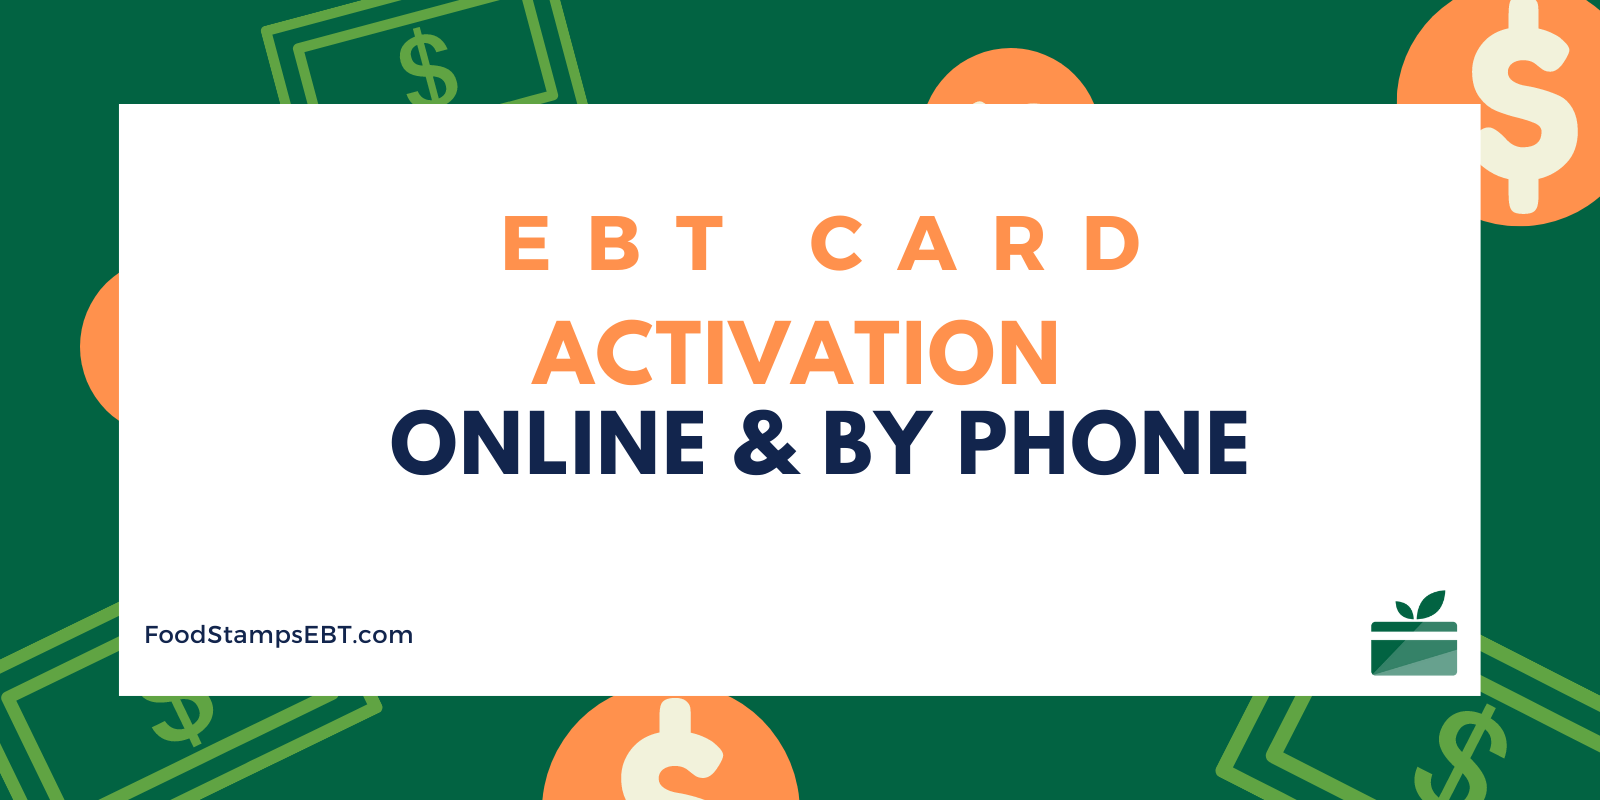 "EBT Card Activation Online and by Phone"